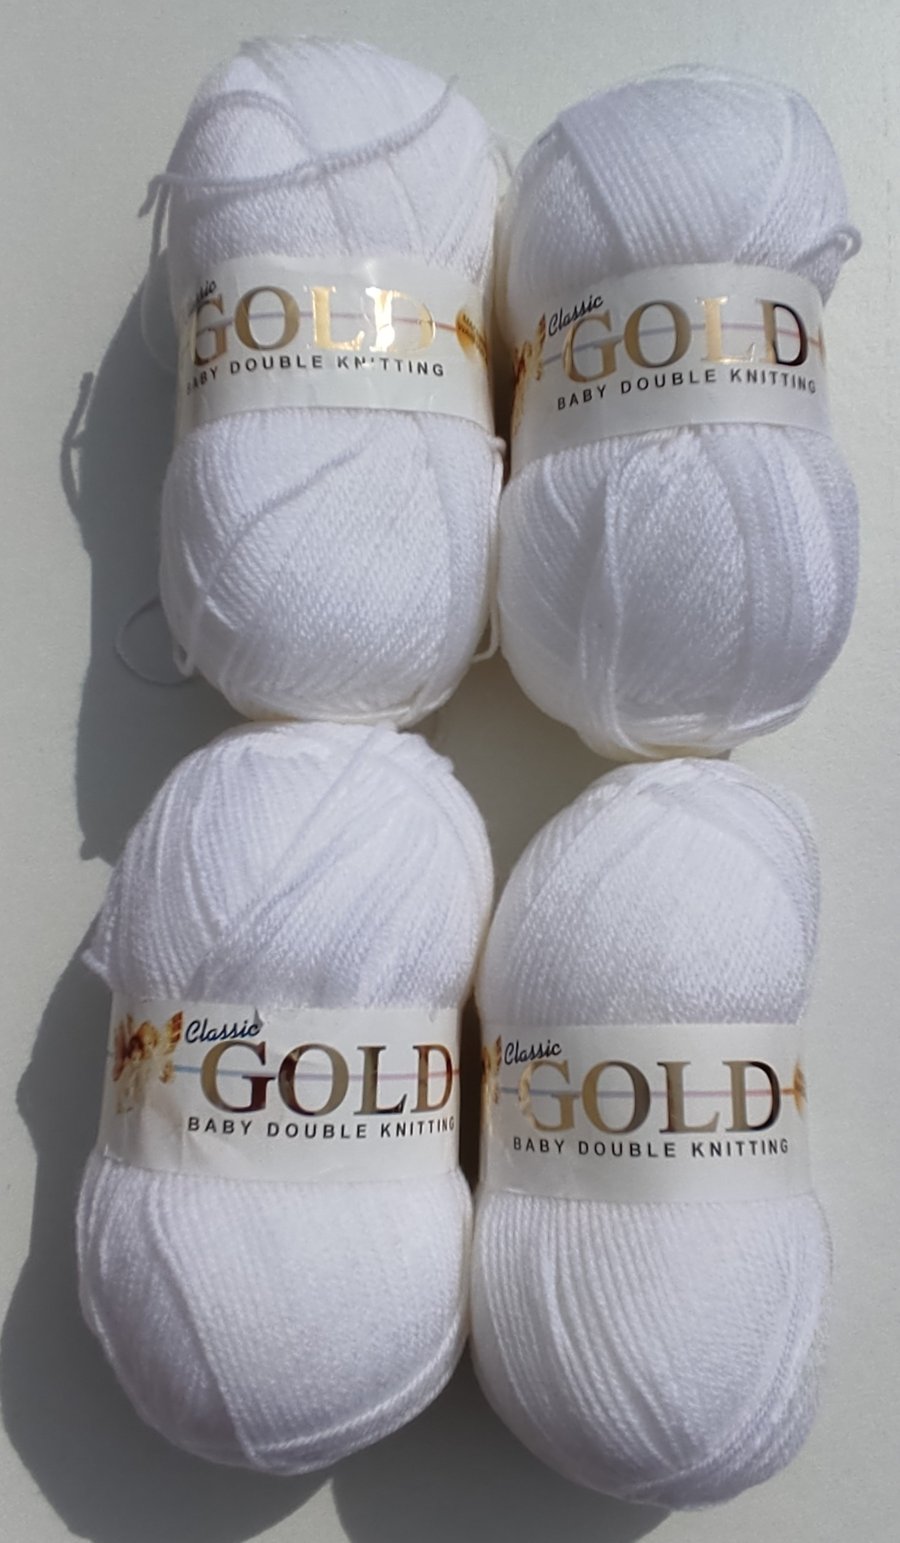 White Baby DK Yarn - Classic Gold by Woolcraft